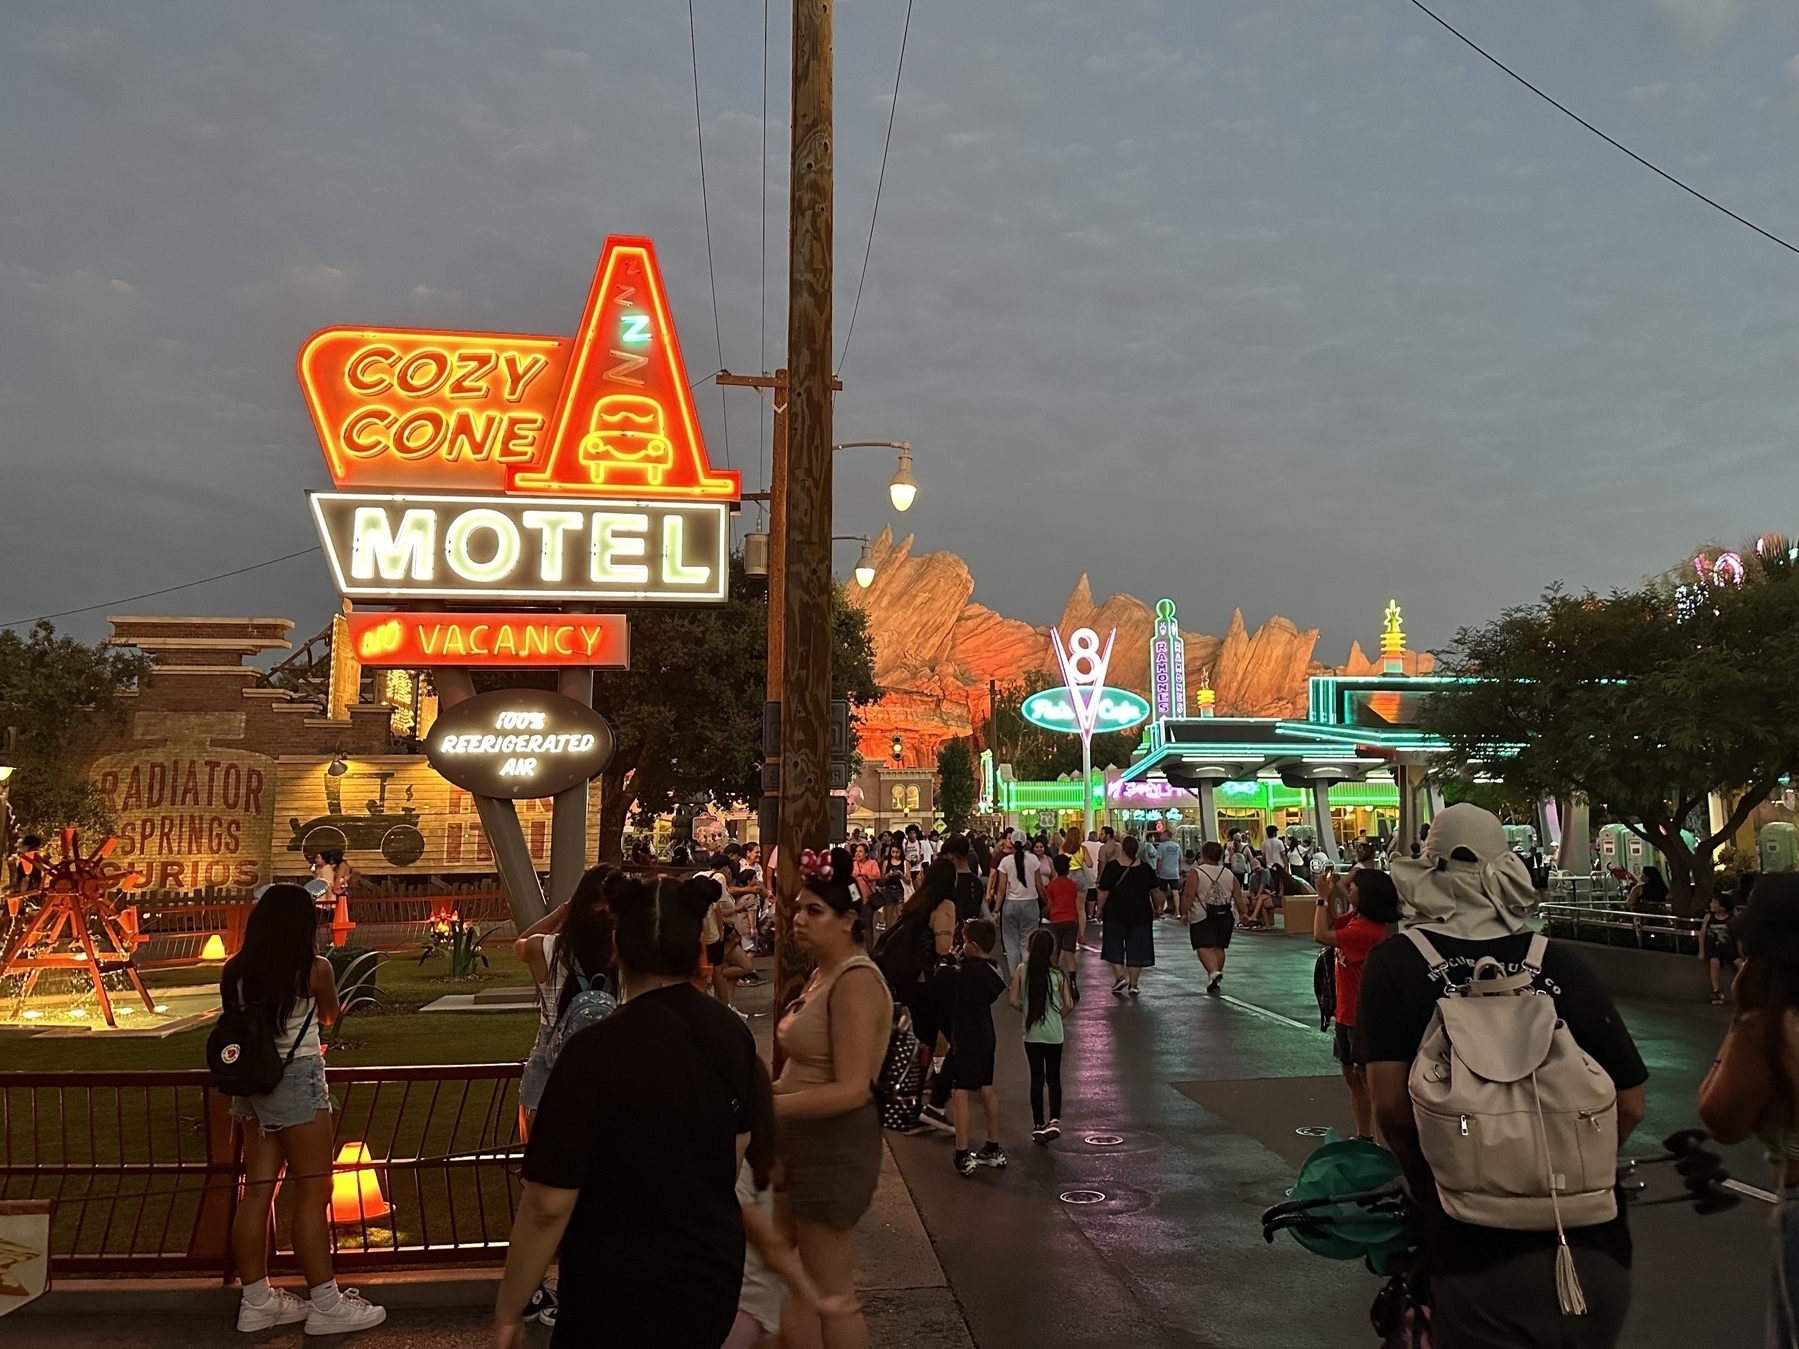 Radiator Springs at night. The Cozy Cone Motel and Flo’s V8 cafe neon glow against the night sky.